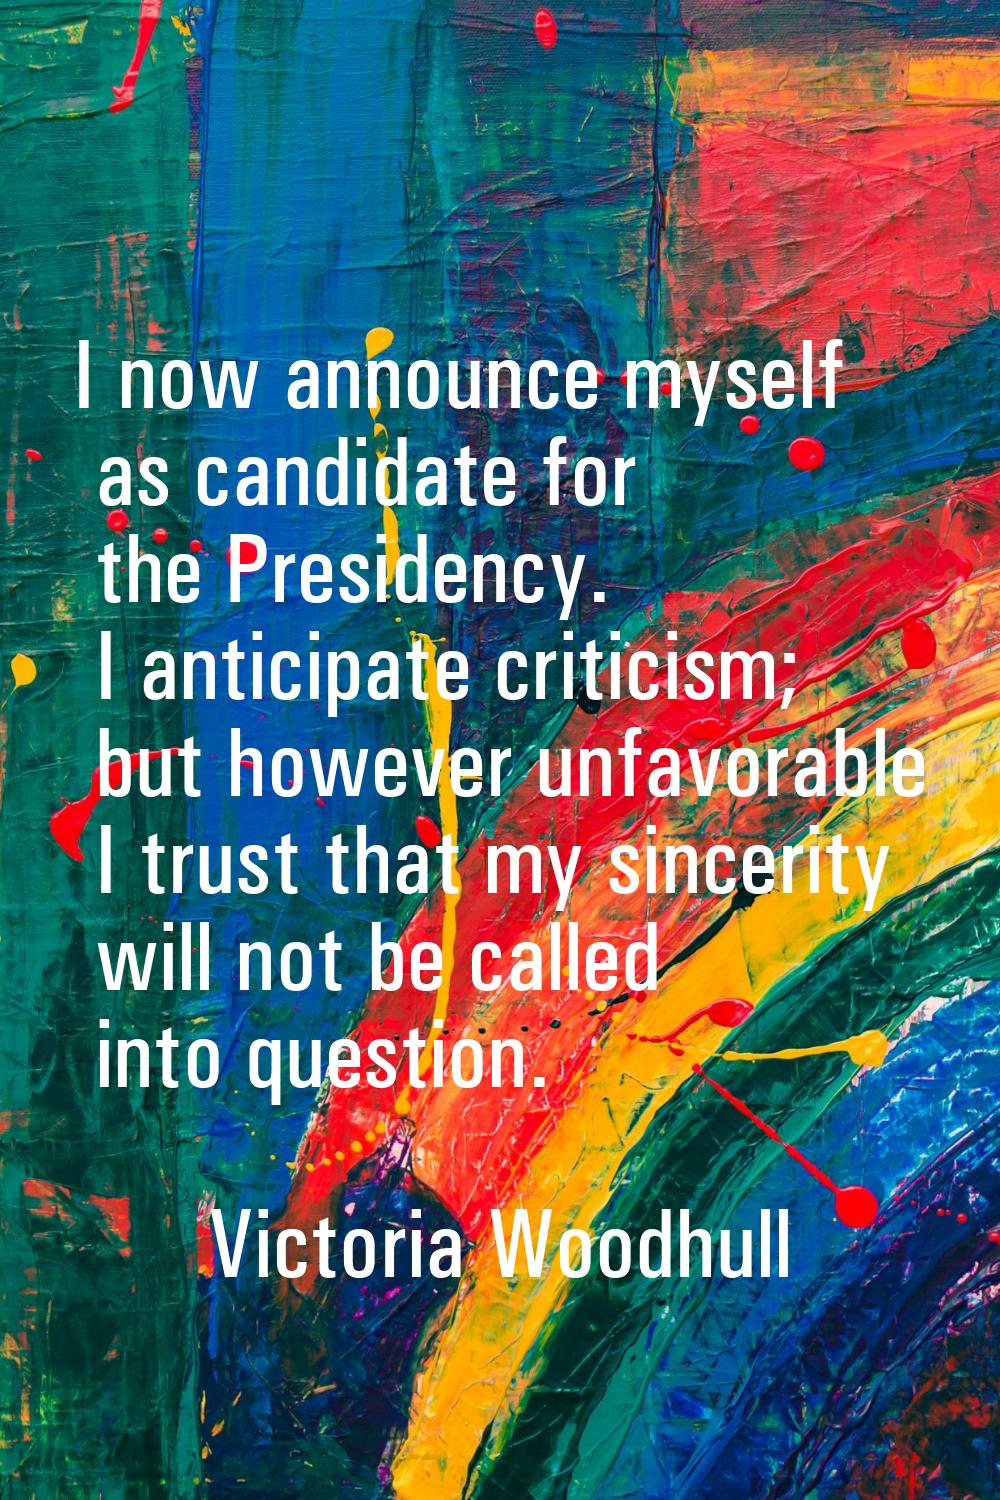 I now announce myself as candidate for the Presidency. I anticipate criticism; but however unfavora